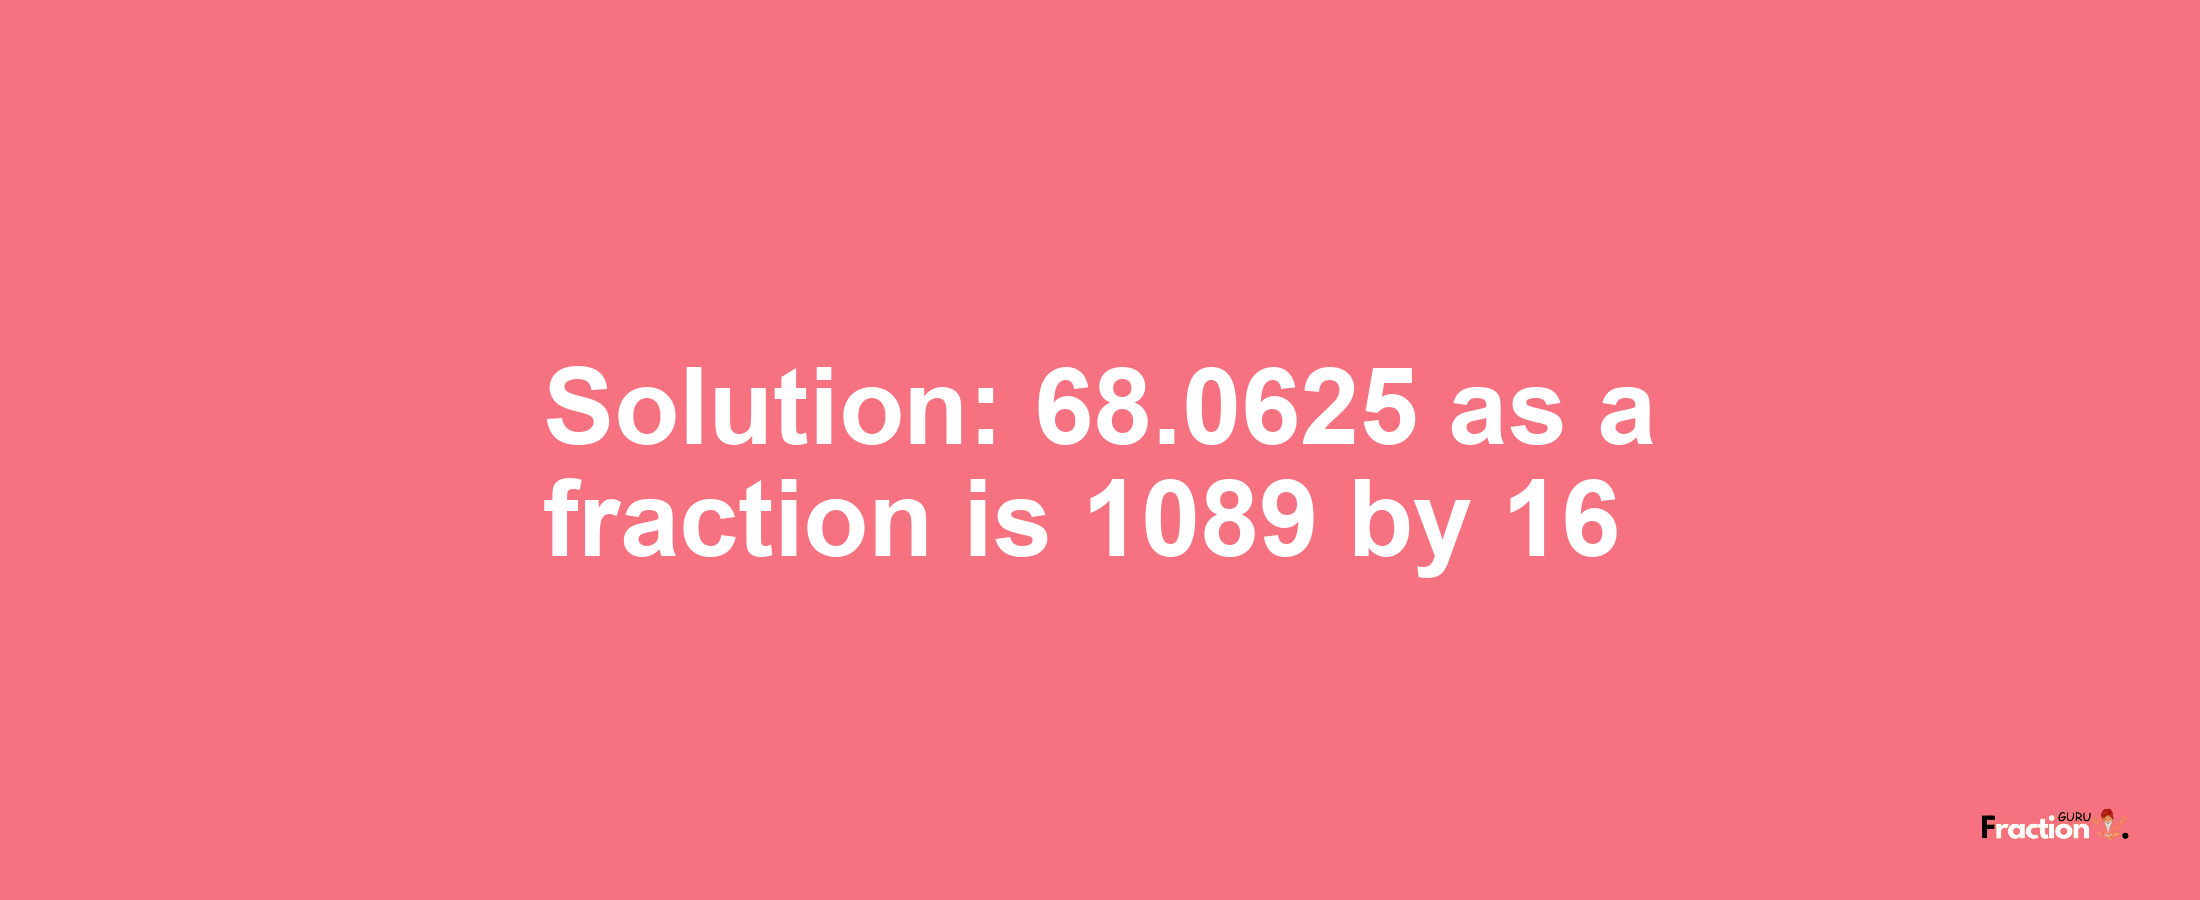 Solution:68.0625 as a fraction is 1089/16